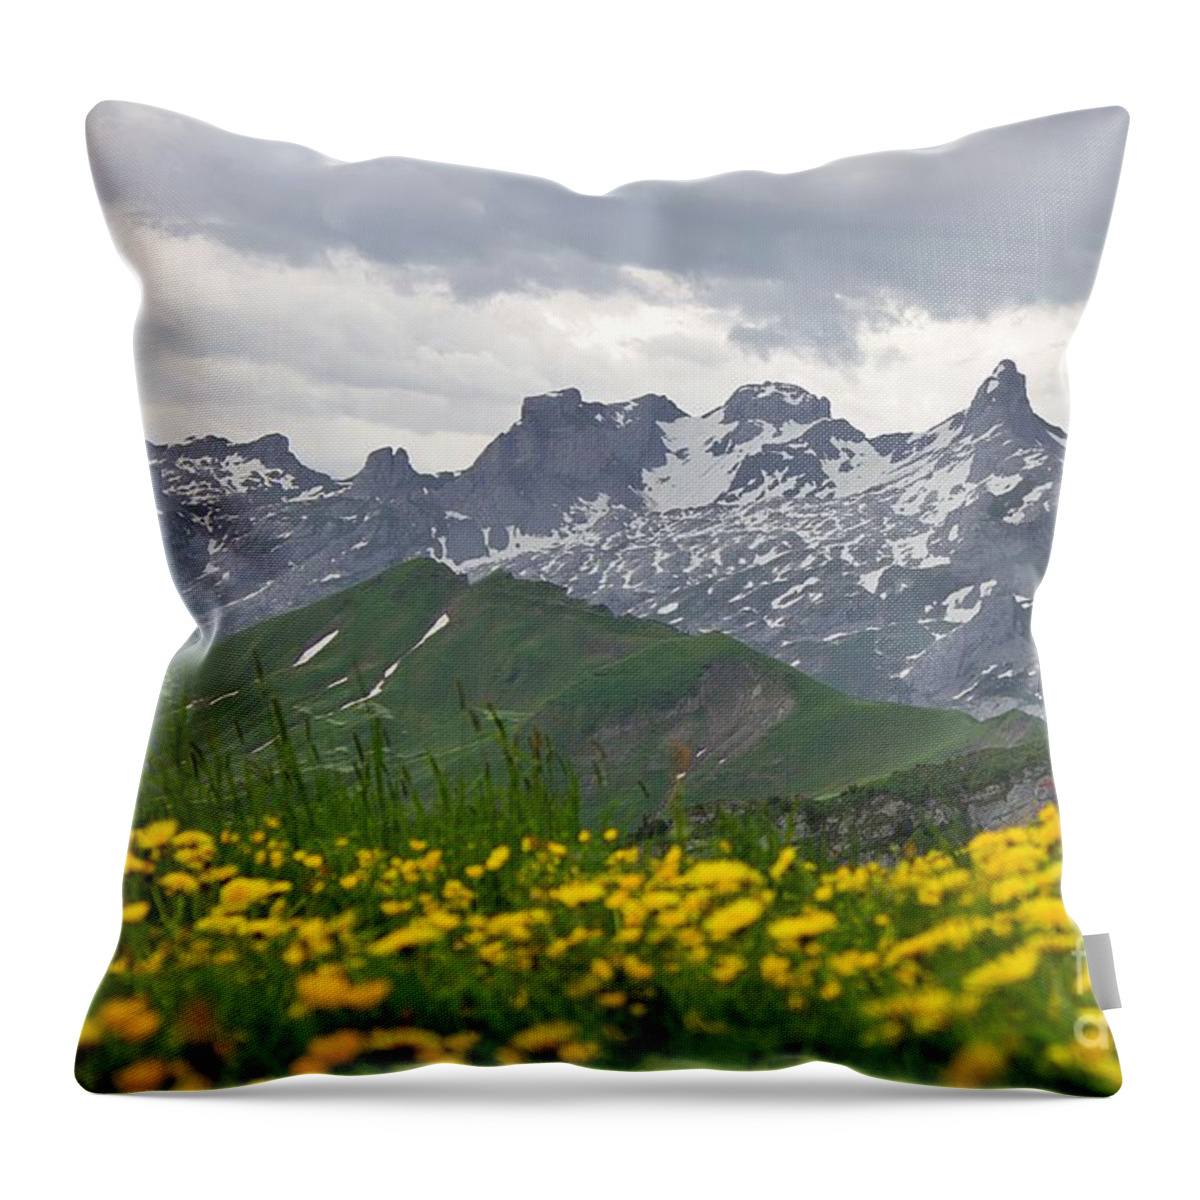 Yellow Flowers Throw Pillow featuring the photograph Swiss Alps Mountain View by Yvonne M Smith